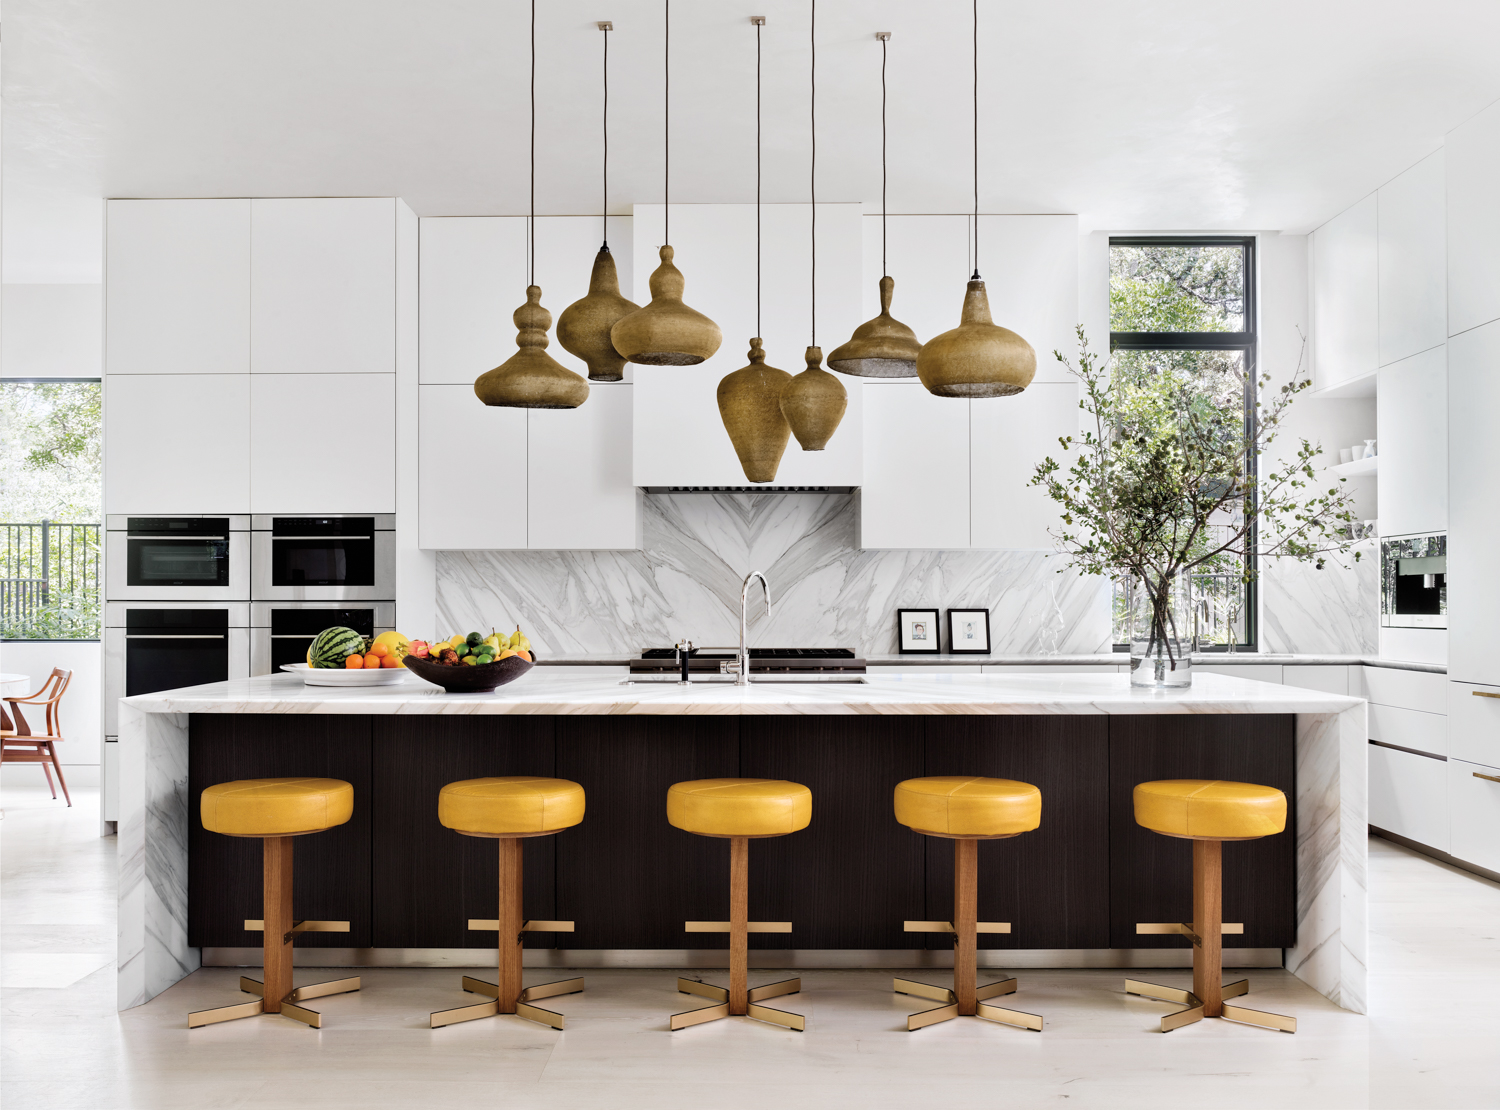 kitchen featuring pendant lighting and yellow counter stools